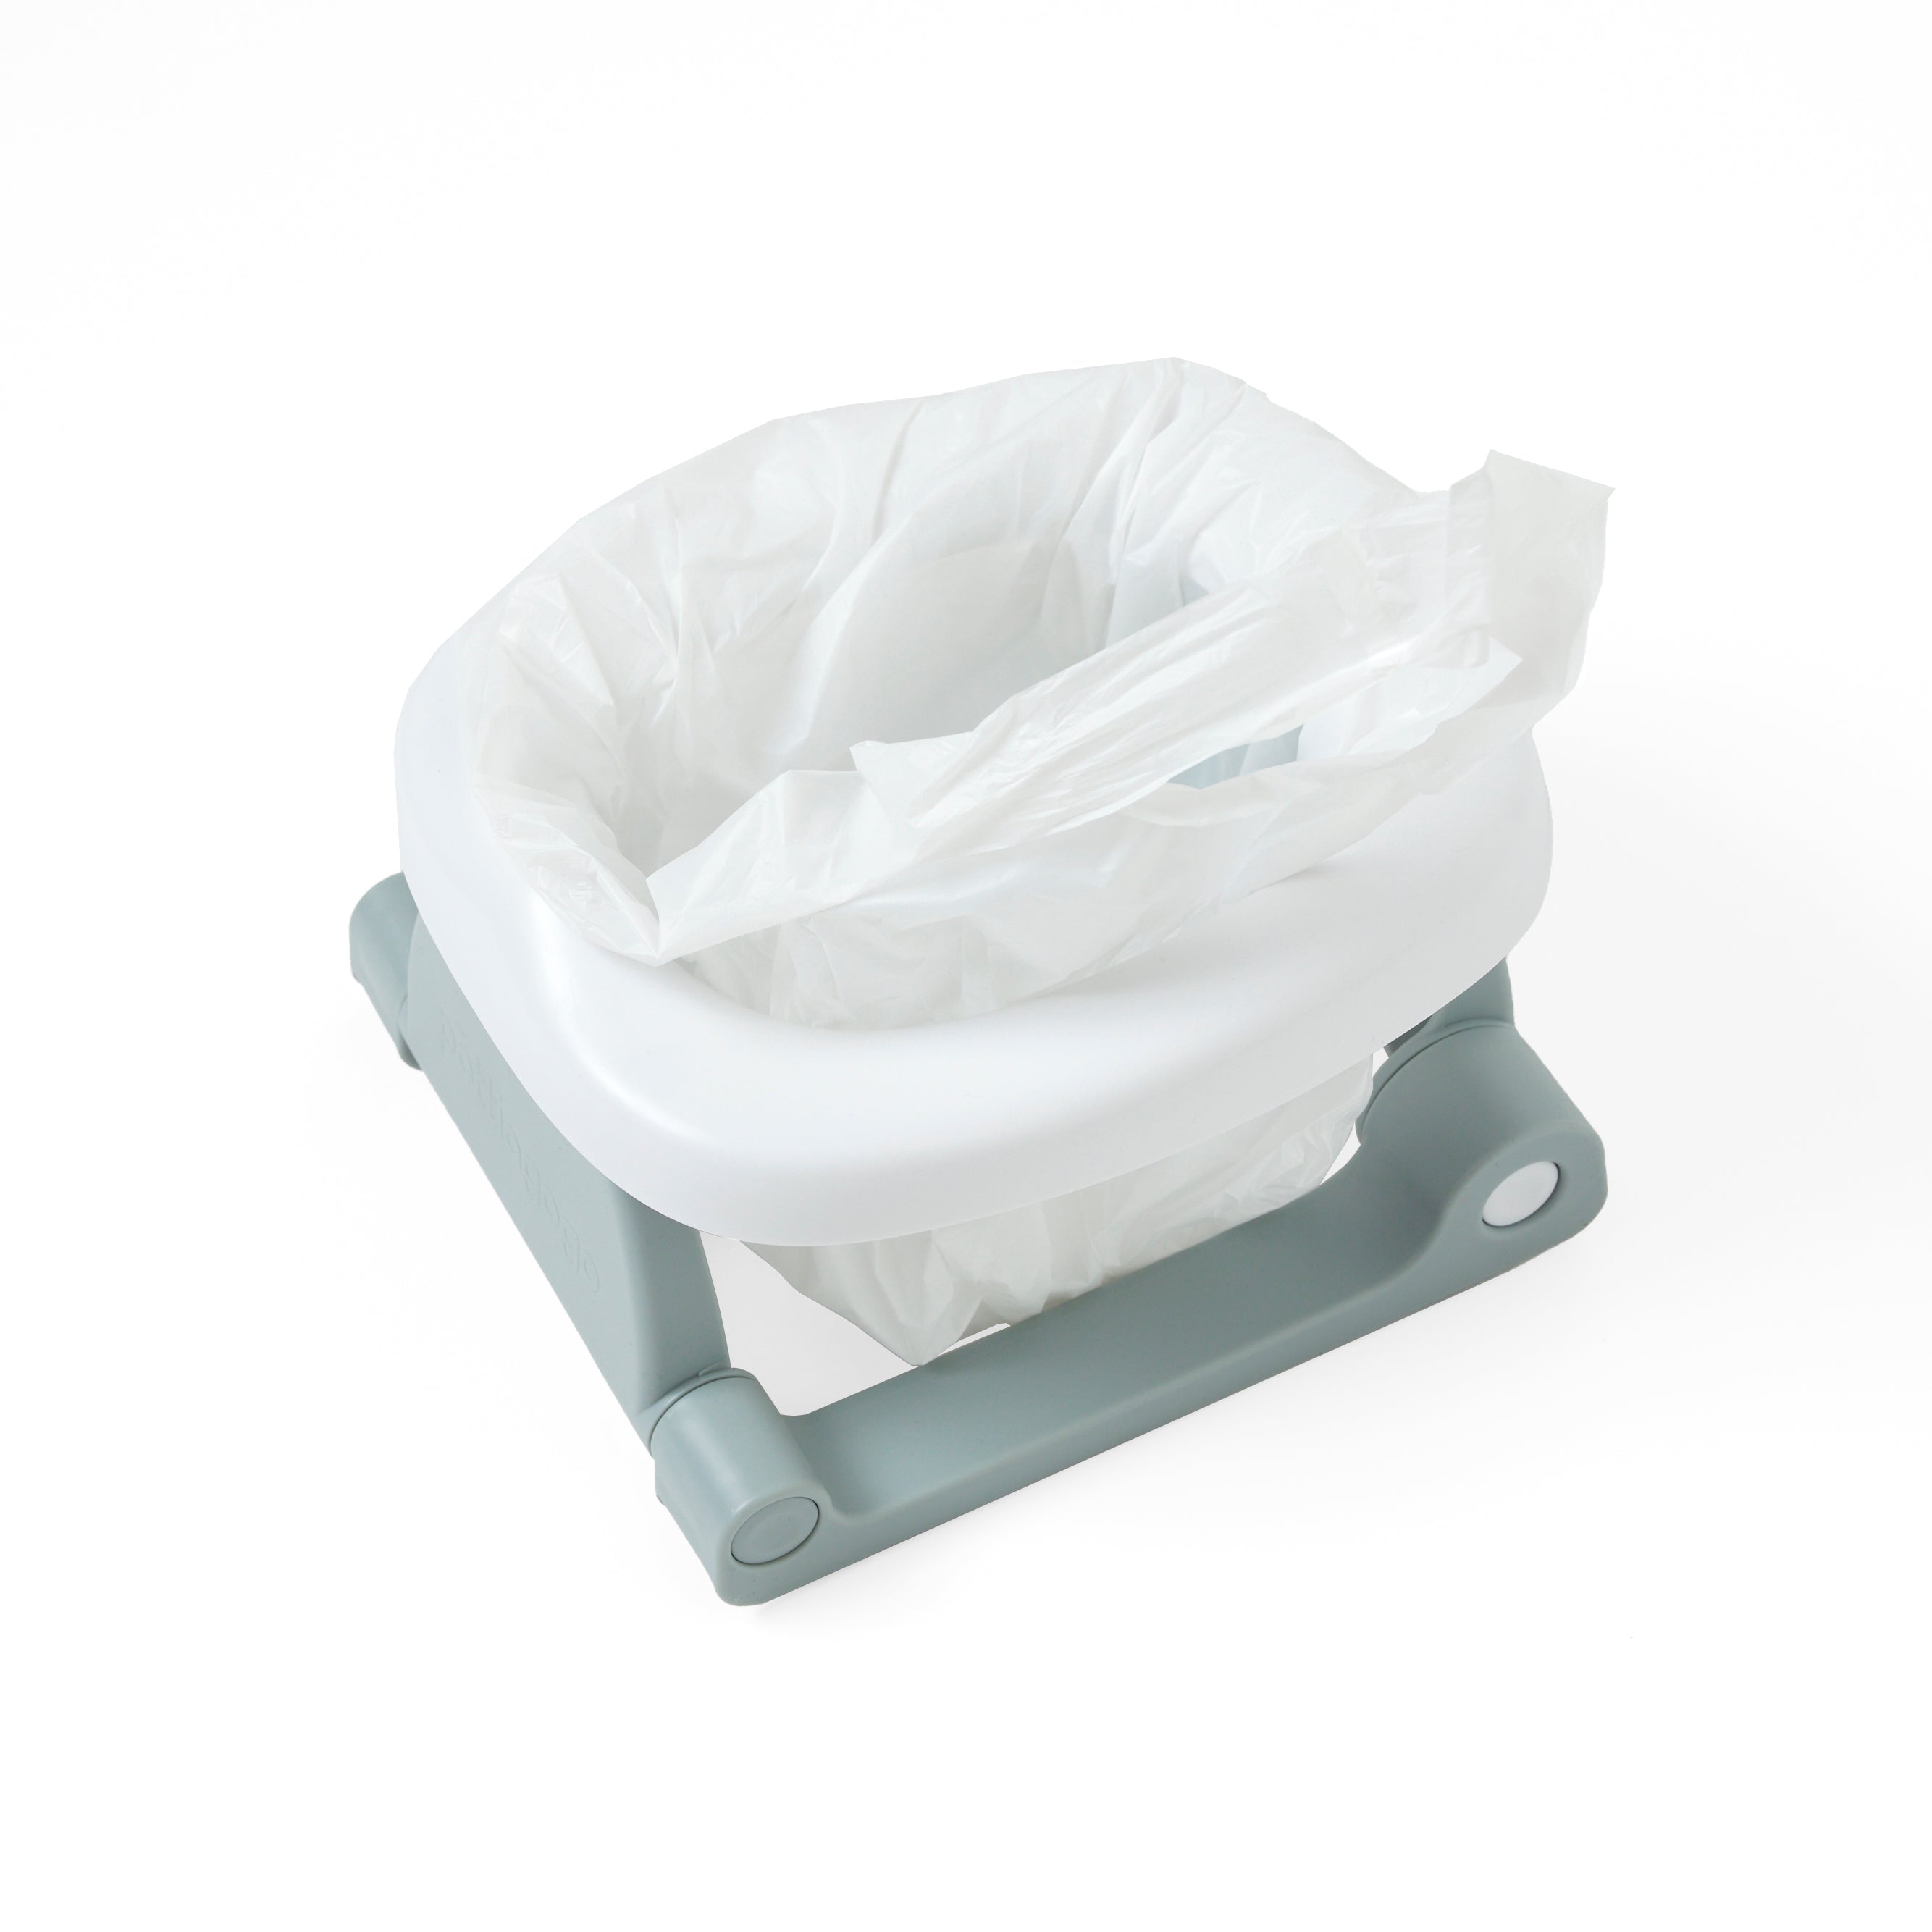 Biodegradable Potty Liners